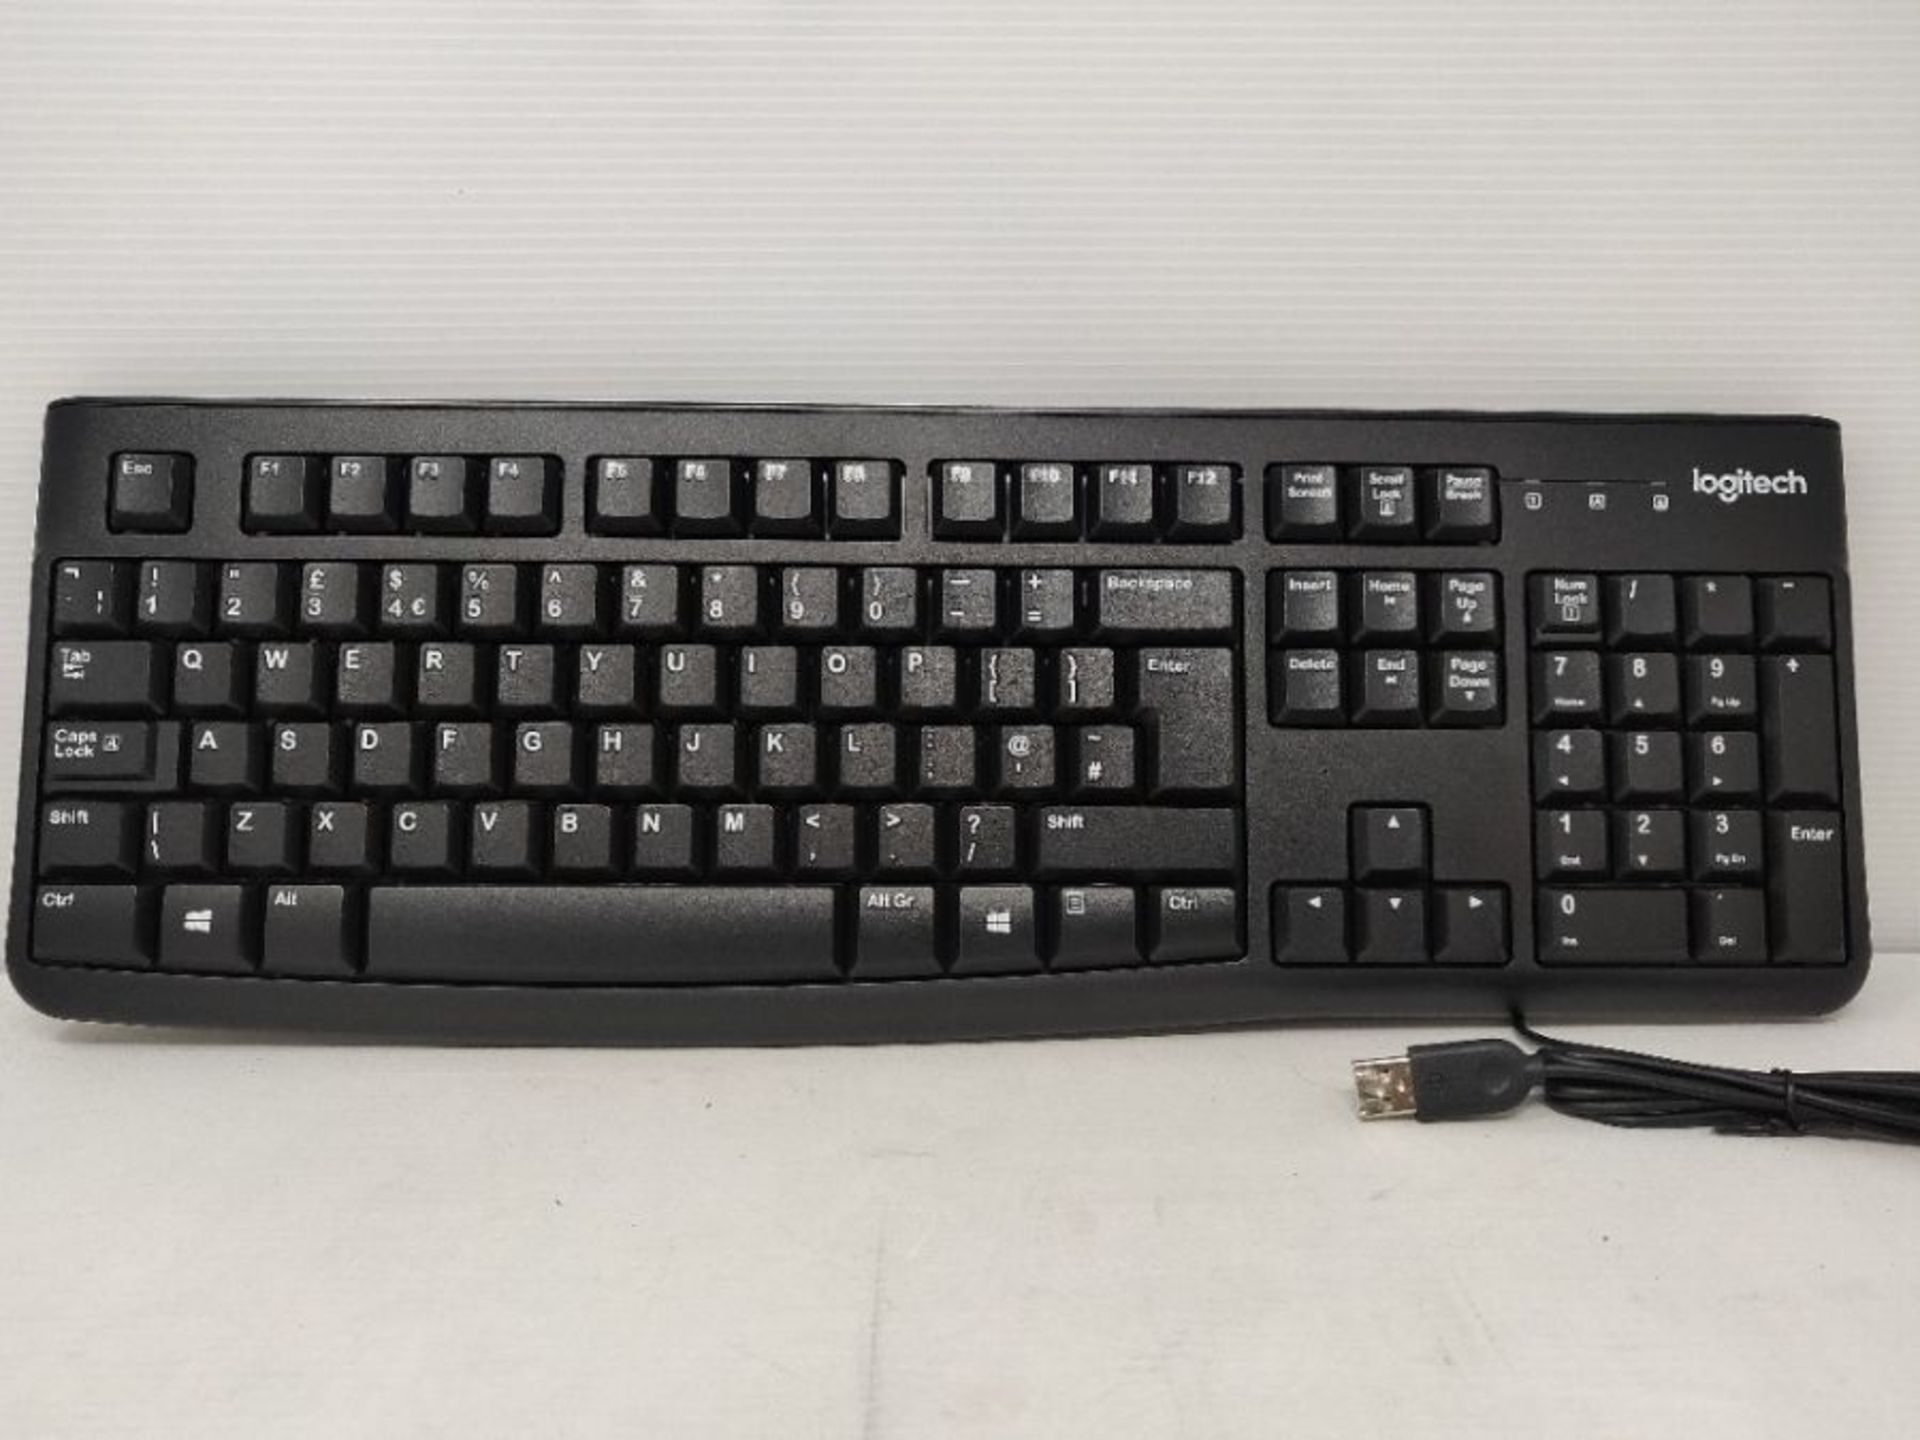 Logitech K120 Wired Business Keyboard for Windows or Linux, USB Plug-and-Play, Full-Si - Image 3 of 3